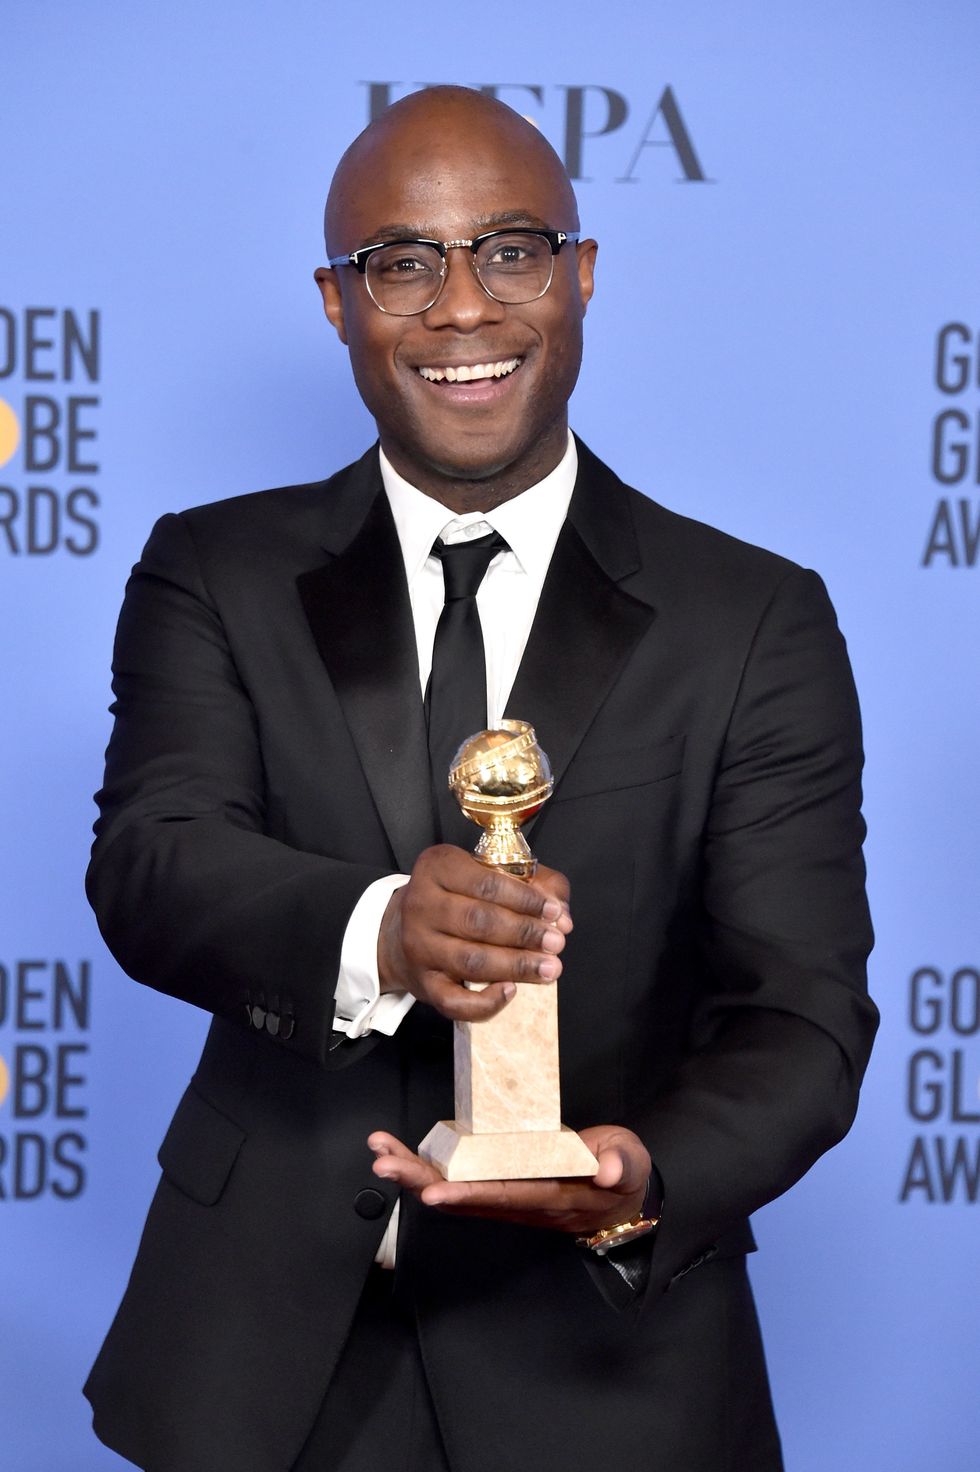 <p>Jenkins' nomination has made history, as it has made the <em data-redactor-tag="em" data-verified="redactor">Moonlight</em> director the first black writer/director to be nominated for Best Picture, Best Director,&nbsp;and Best Screenplay. If he wins the award for Best Director, he will become the first black man to be awarded the title.</p><p>The director is also widely known for his film <em data-redactor-tag="em" data-verified="redactor">Medicine for Melancholy</em>, while <em data-redactor-tag="em" data-verified="redactor">Moonlight</em> has most recently won the Best Picture&nbsp;award at the Golden Globes.&nbsp;</p>